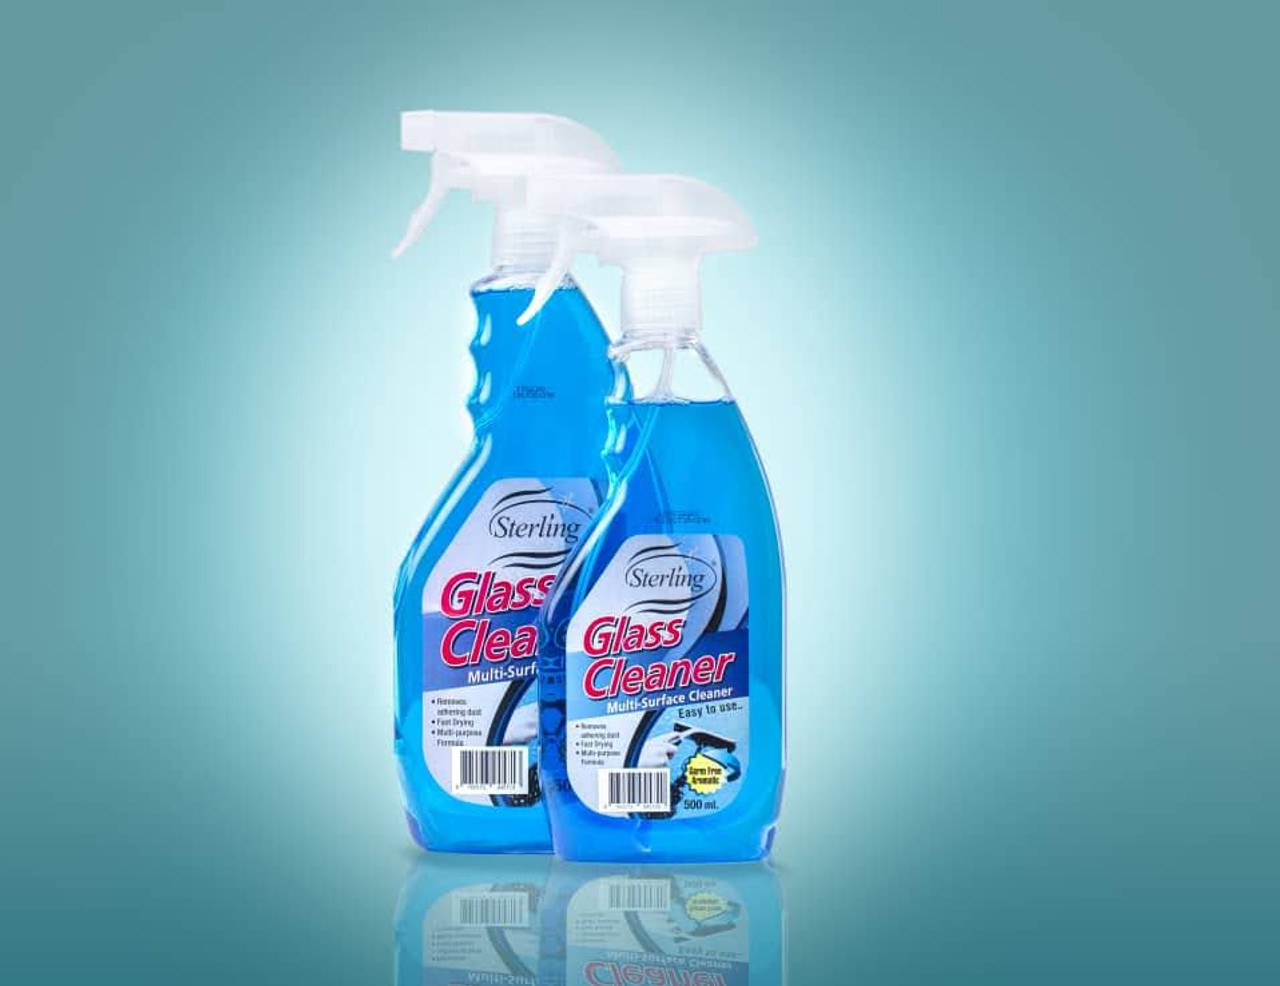 C-Clear Glass Cleaner, Glass Cleaners